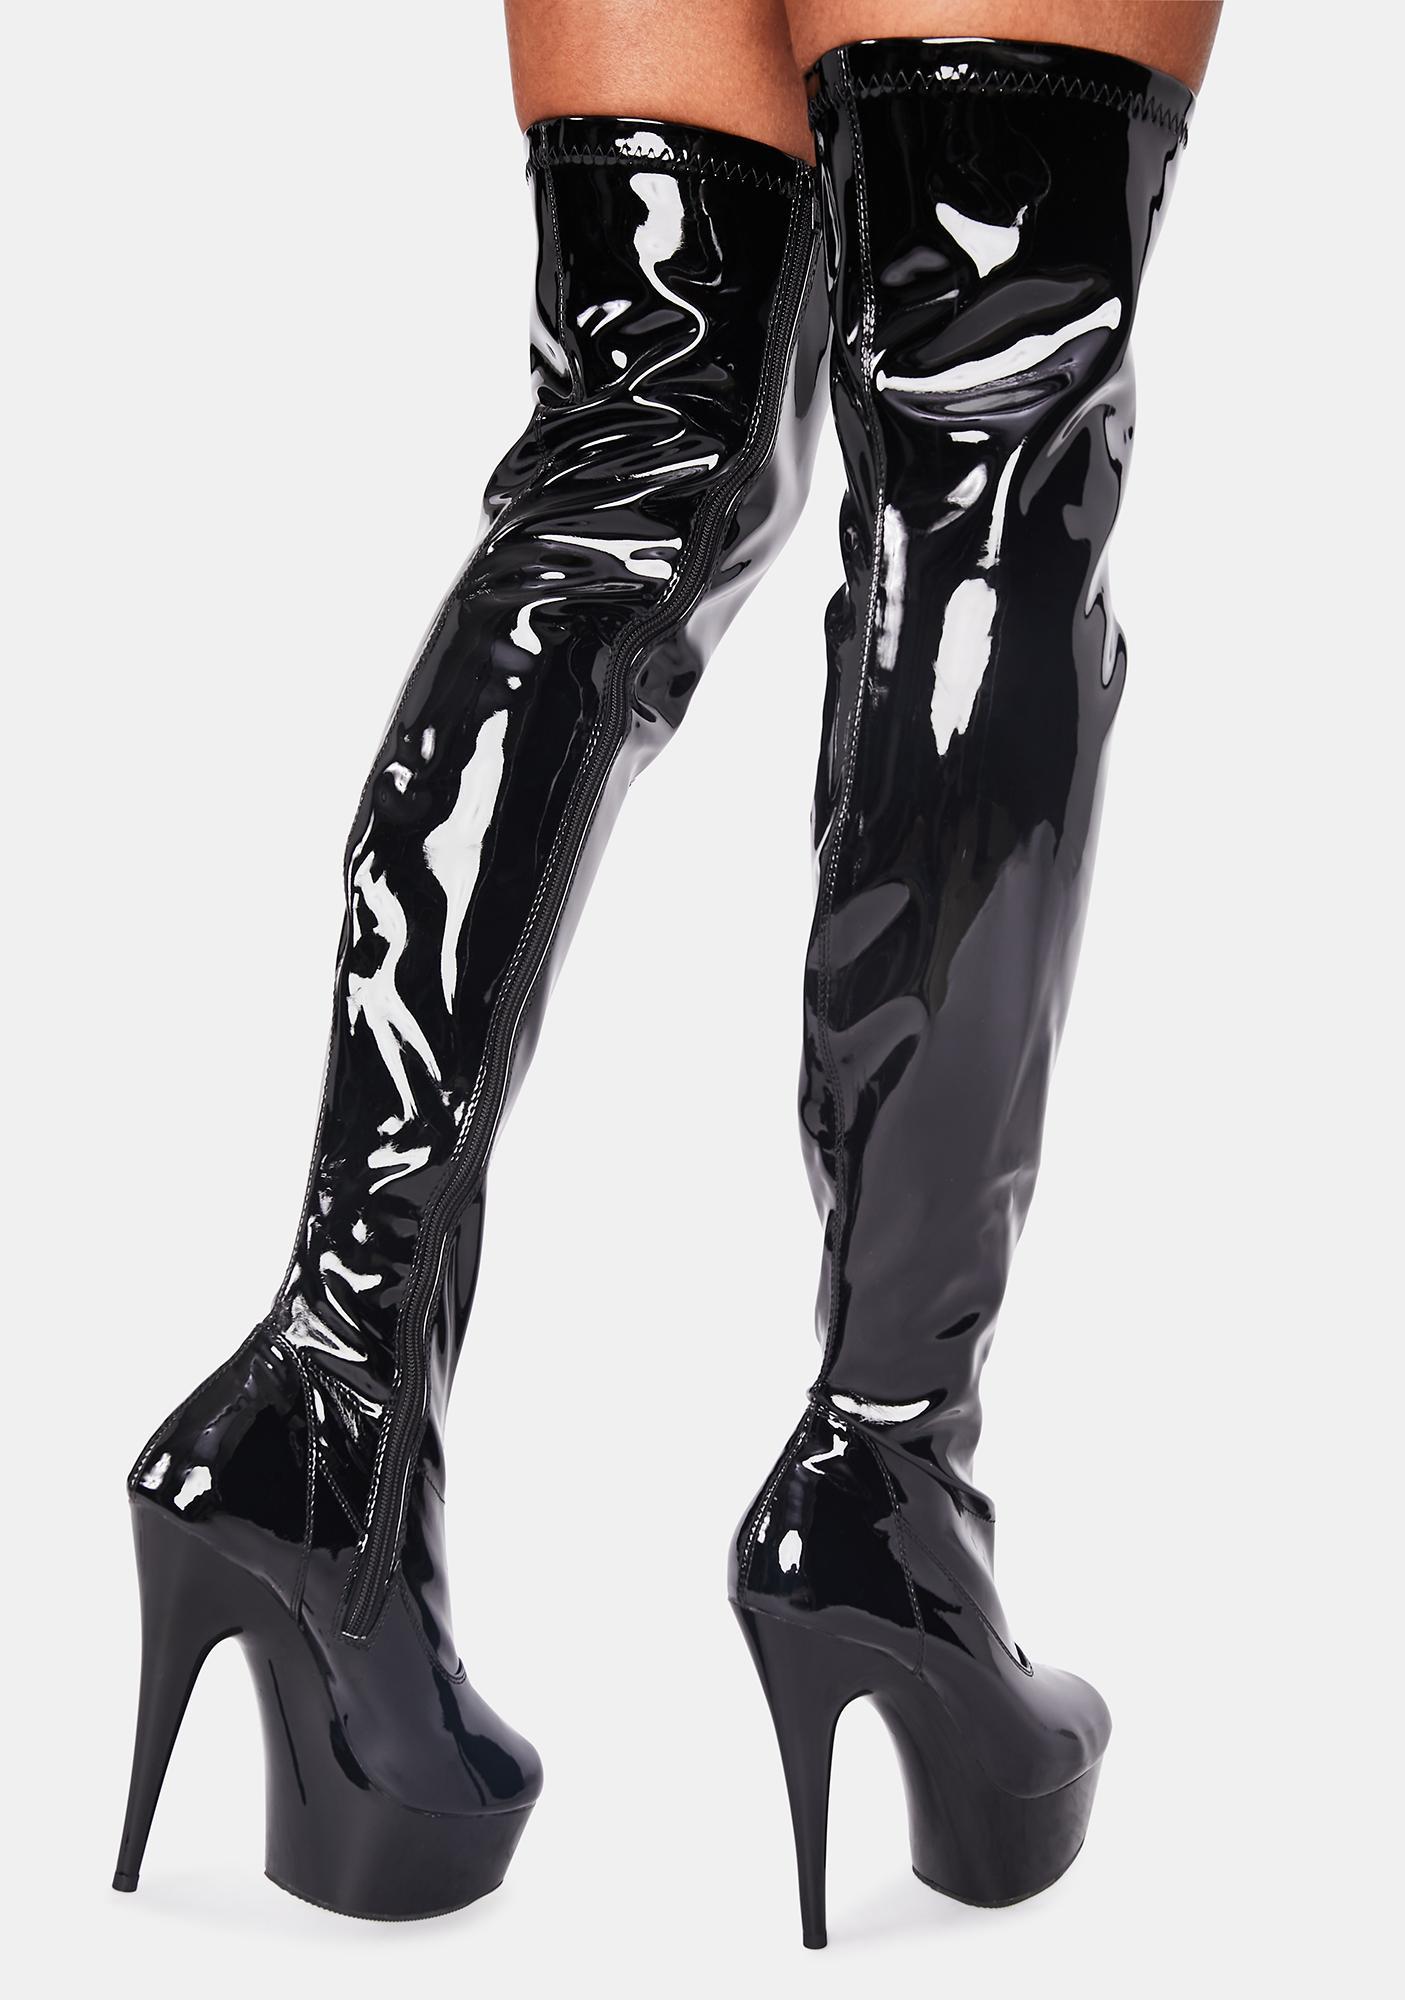 Pleaser Delight 3000 Patent Thigh High Boots Black Dolls Kill